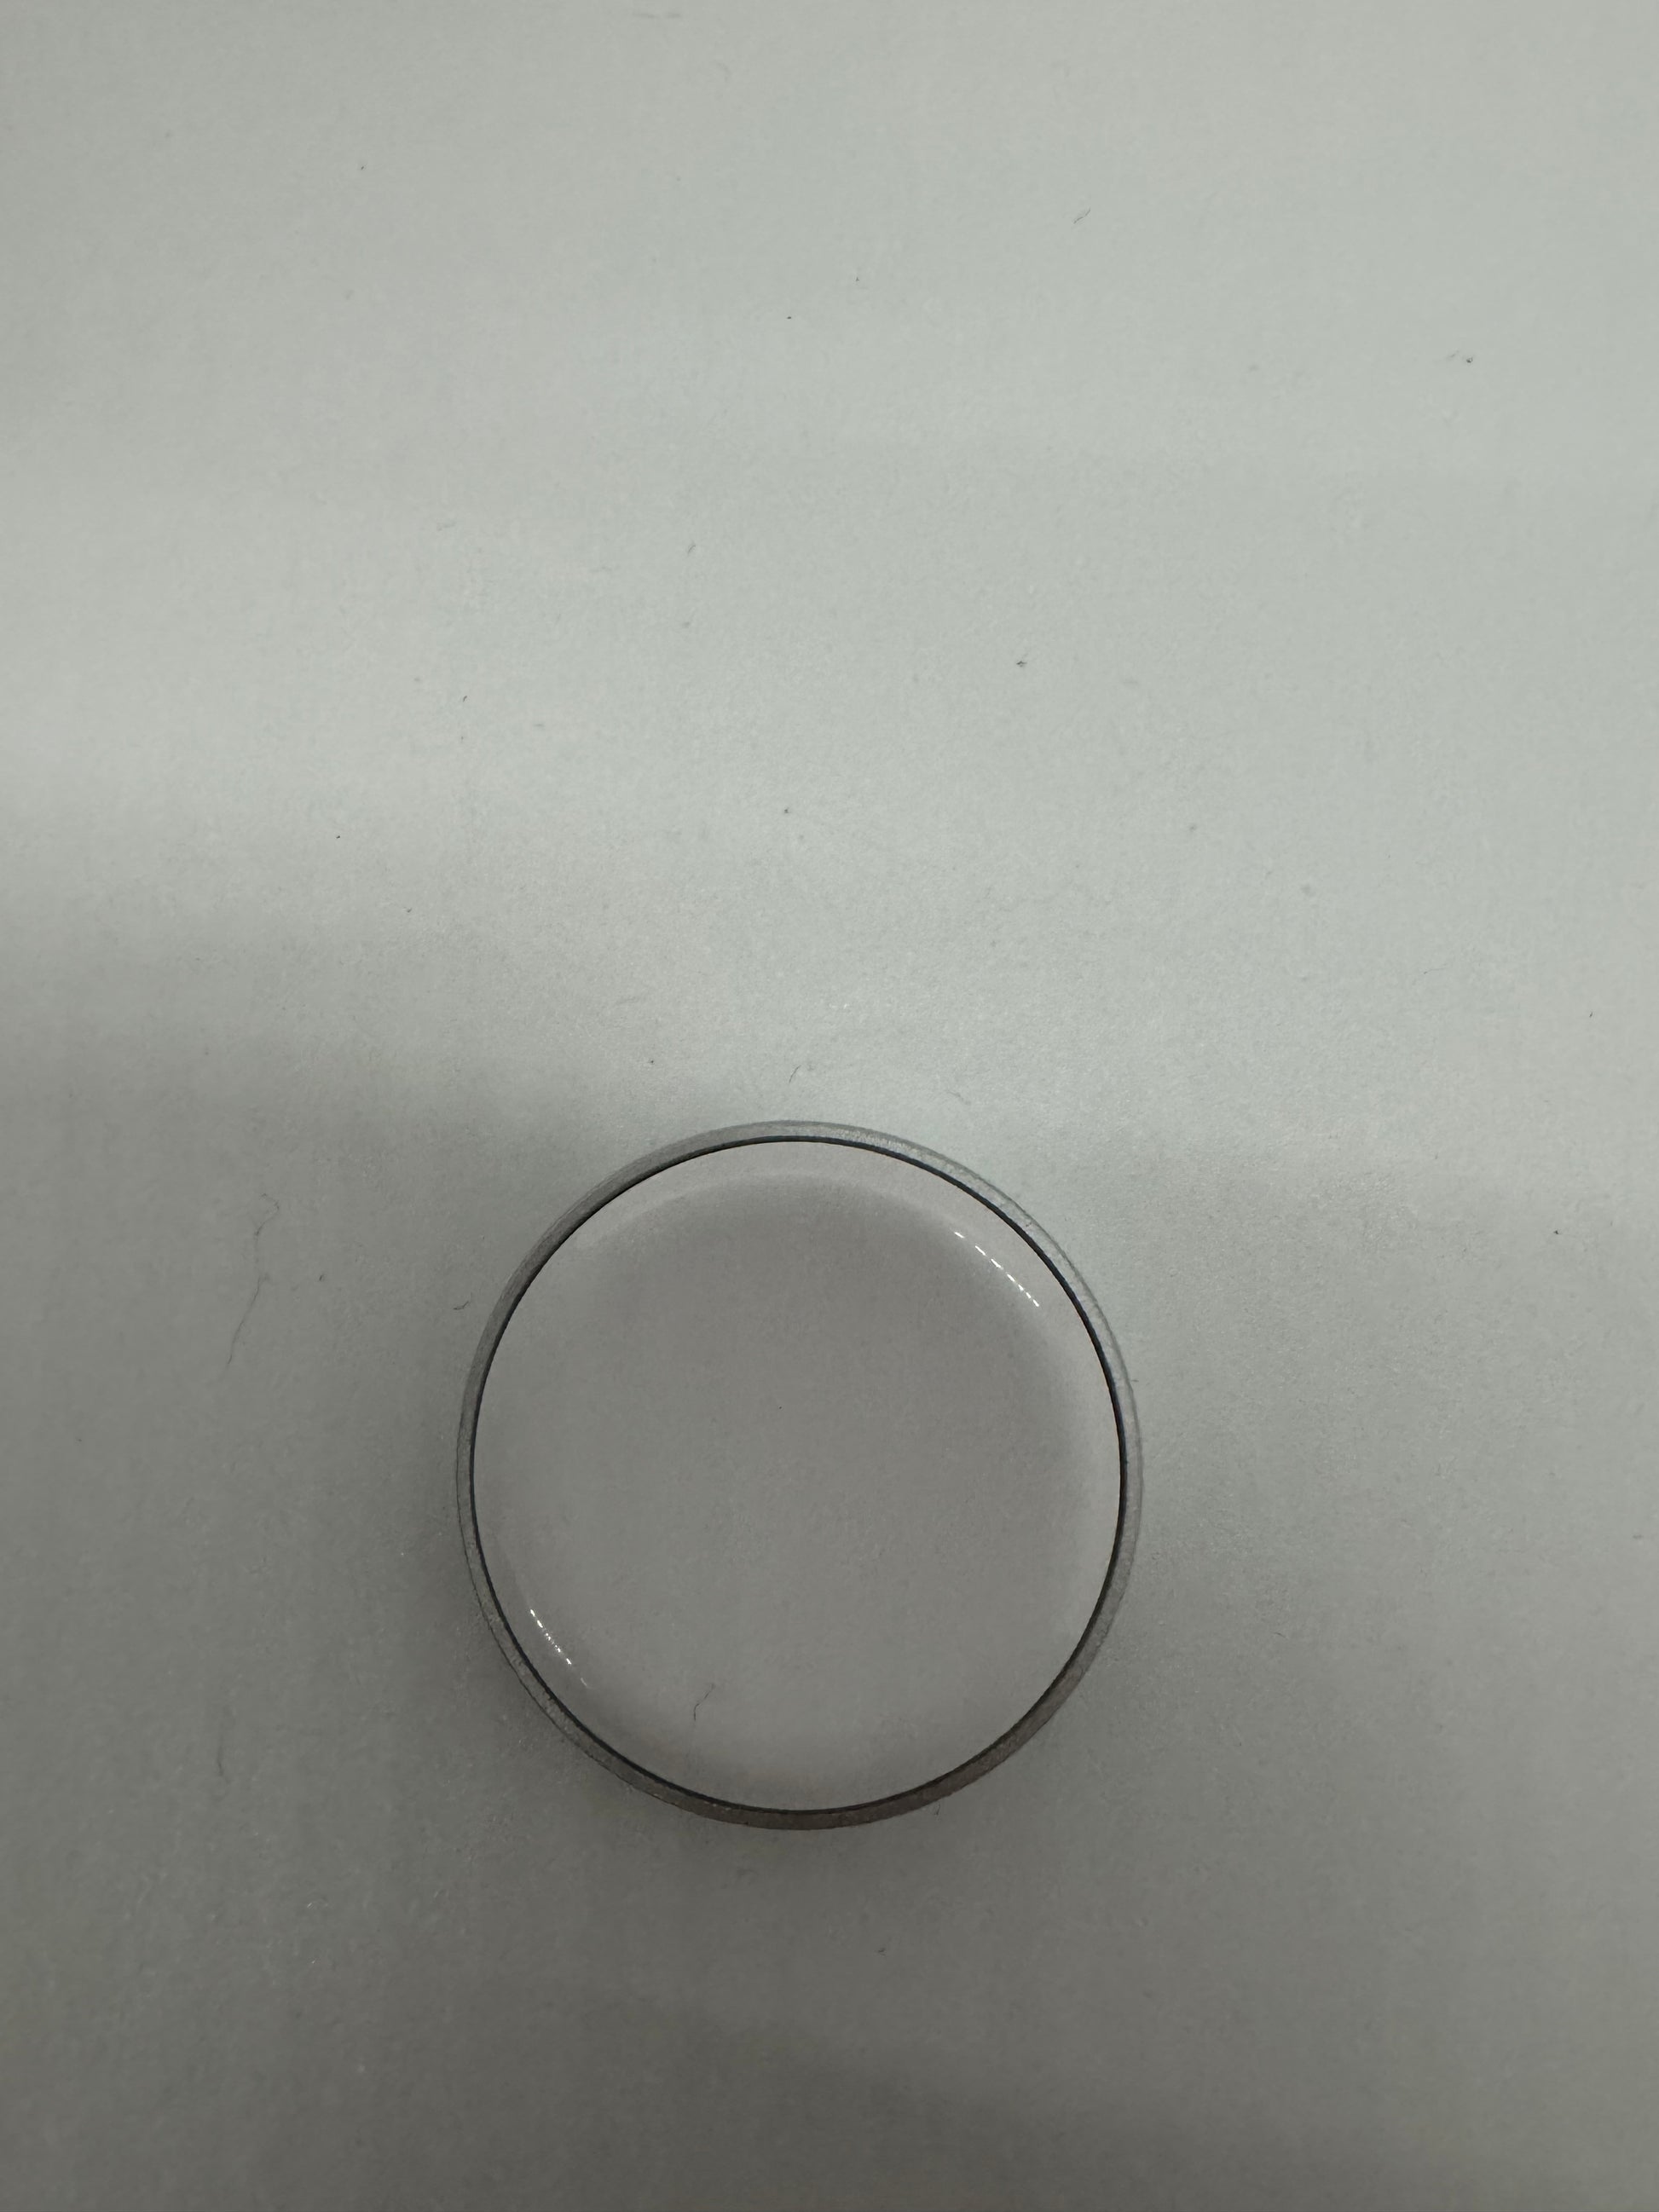 The picture shows a small, circular object on a plain background. The object appears to be a ring or a band, possibly made of metal. It is thin and has a simple design. The background is a light color, and the object is placed towards the bottom of the image.